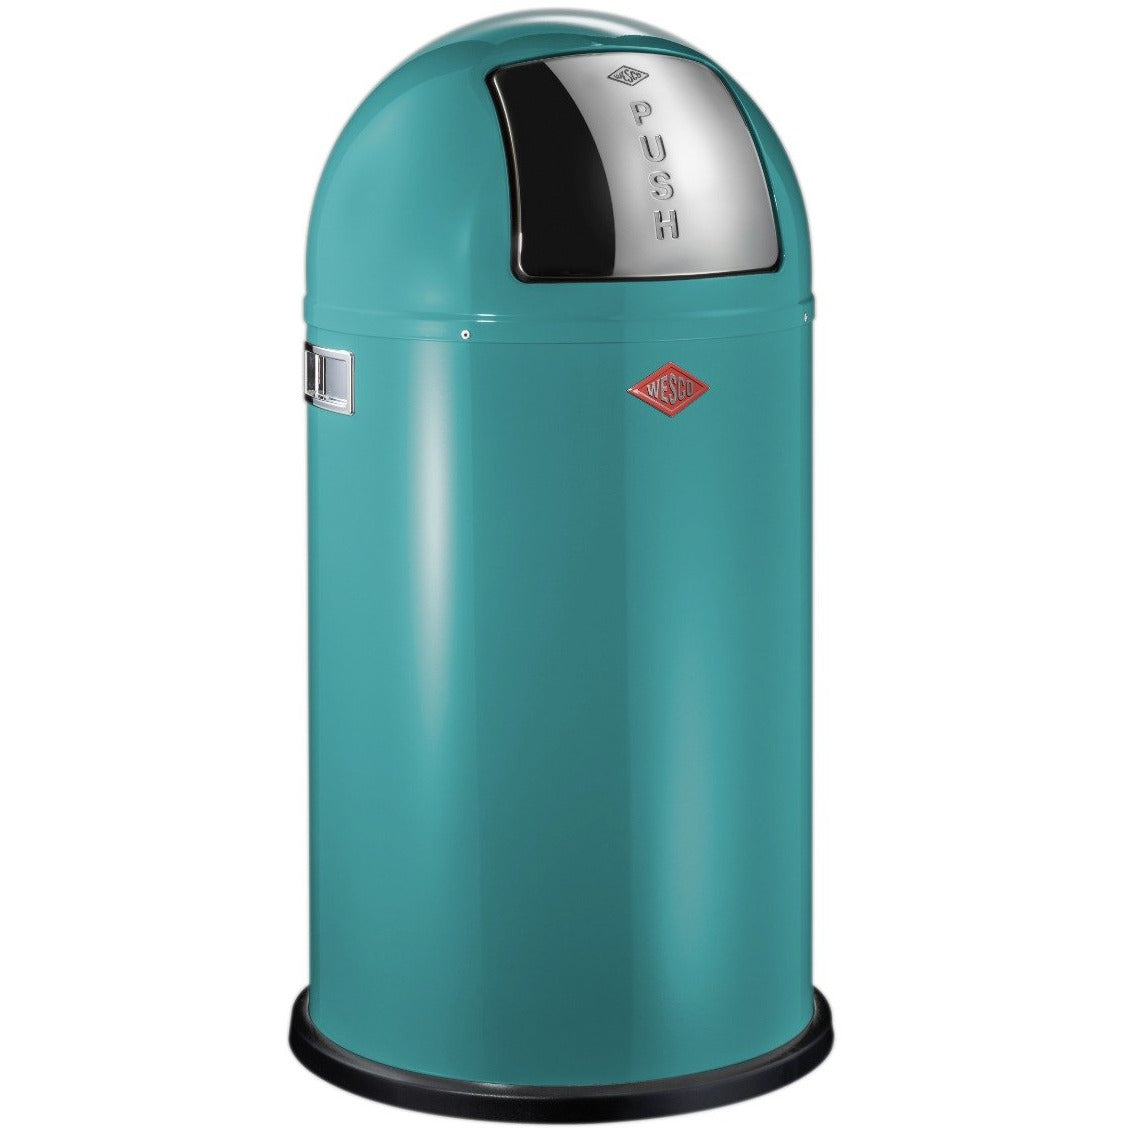 Wesco Pushboy Single Compartment 50 Litre Kitchen Bin in Turquoise: 175831-54